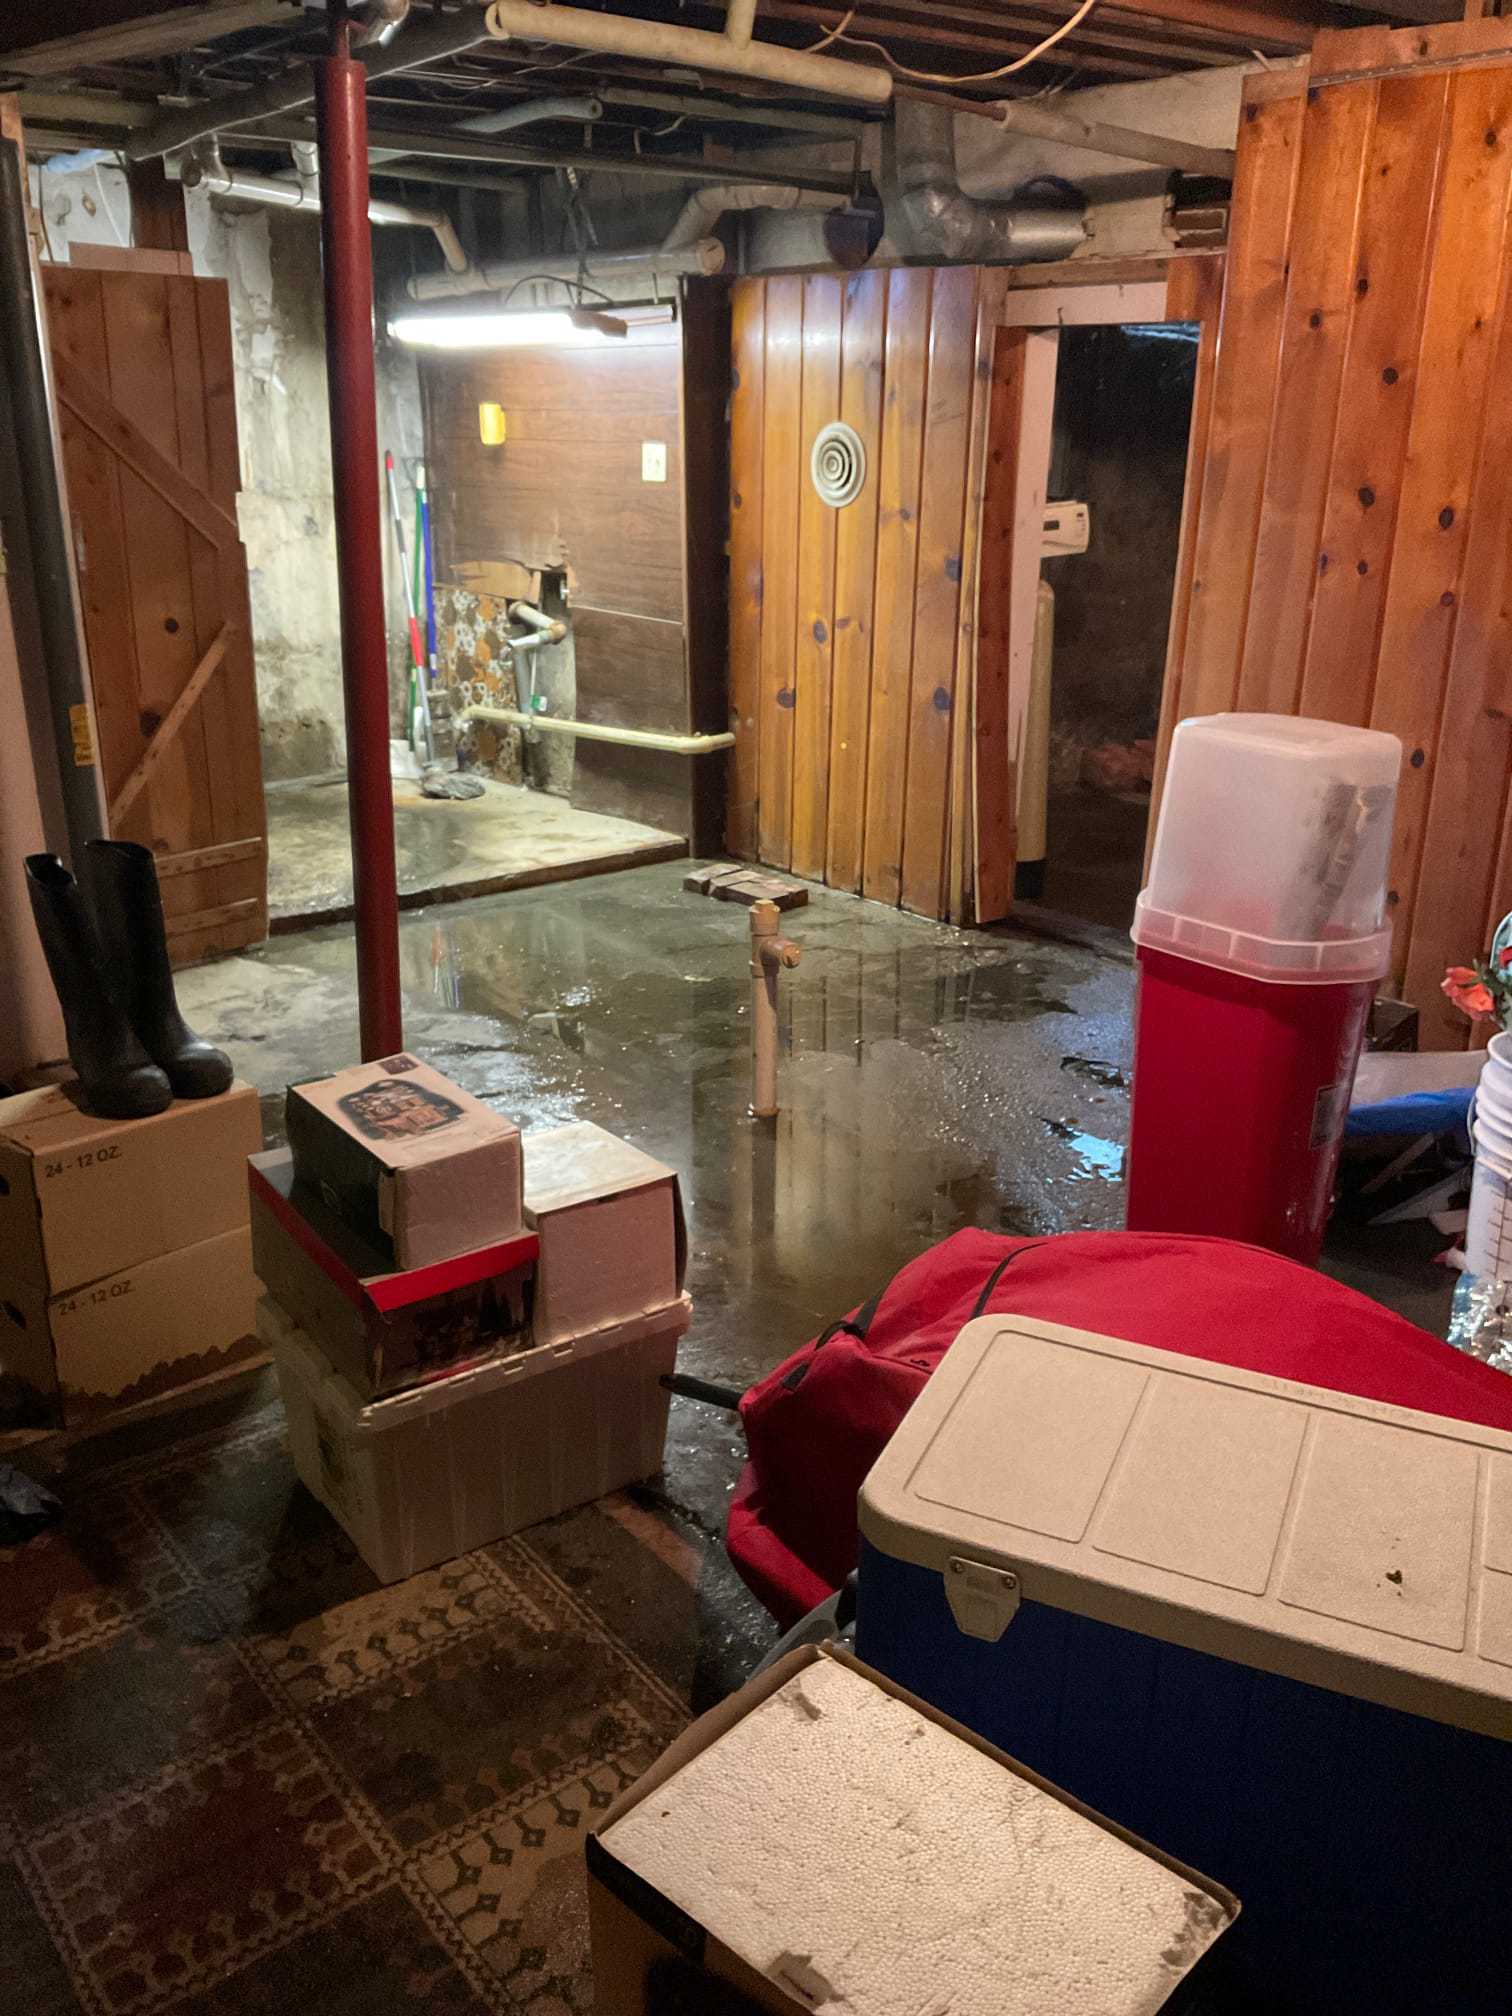 Wet walls and floor due to sewage backup 